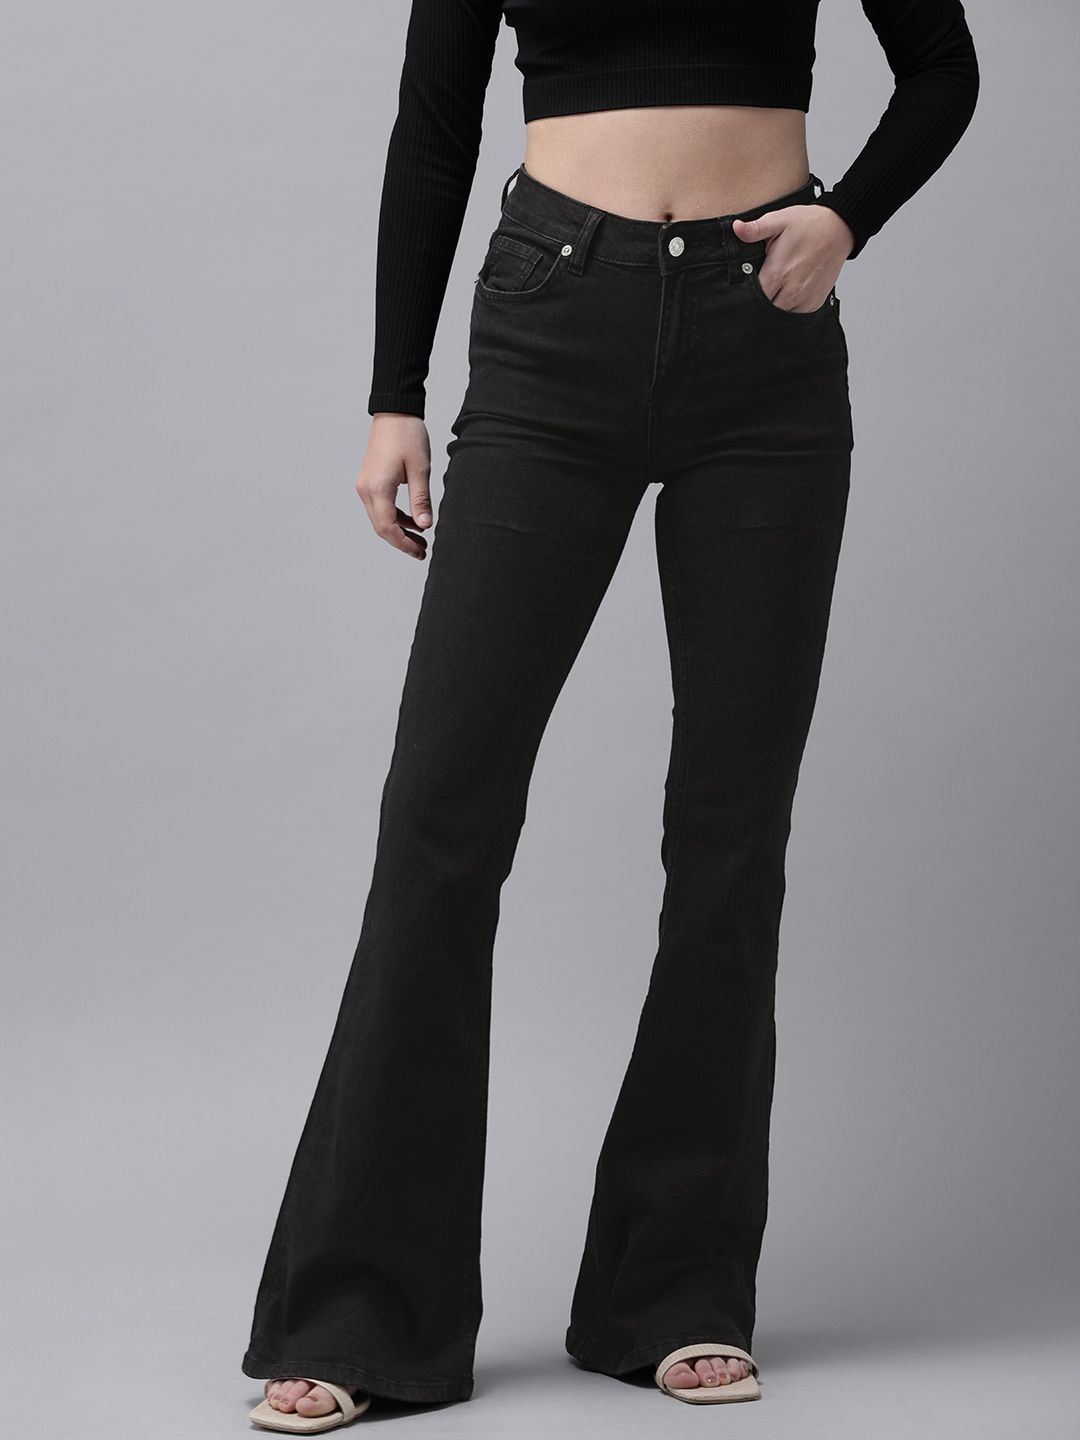 MANGO Women Black Mid-Rise Flared Clean Look Regular Stretchable Jeans Price in India